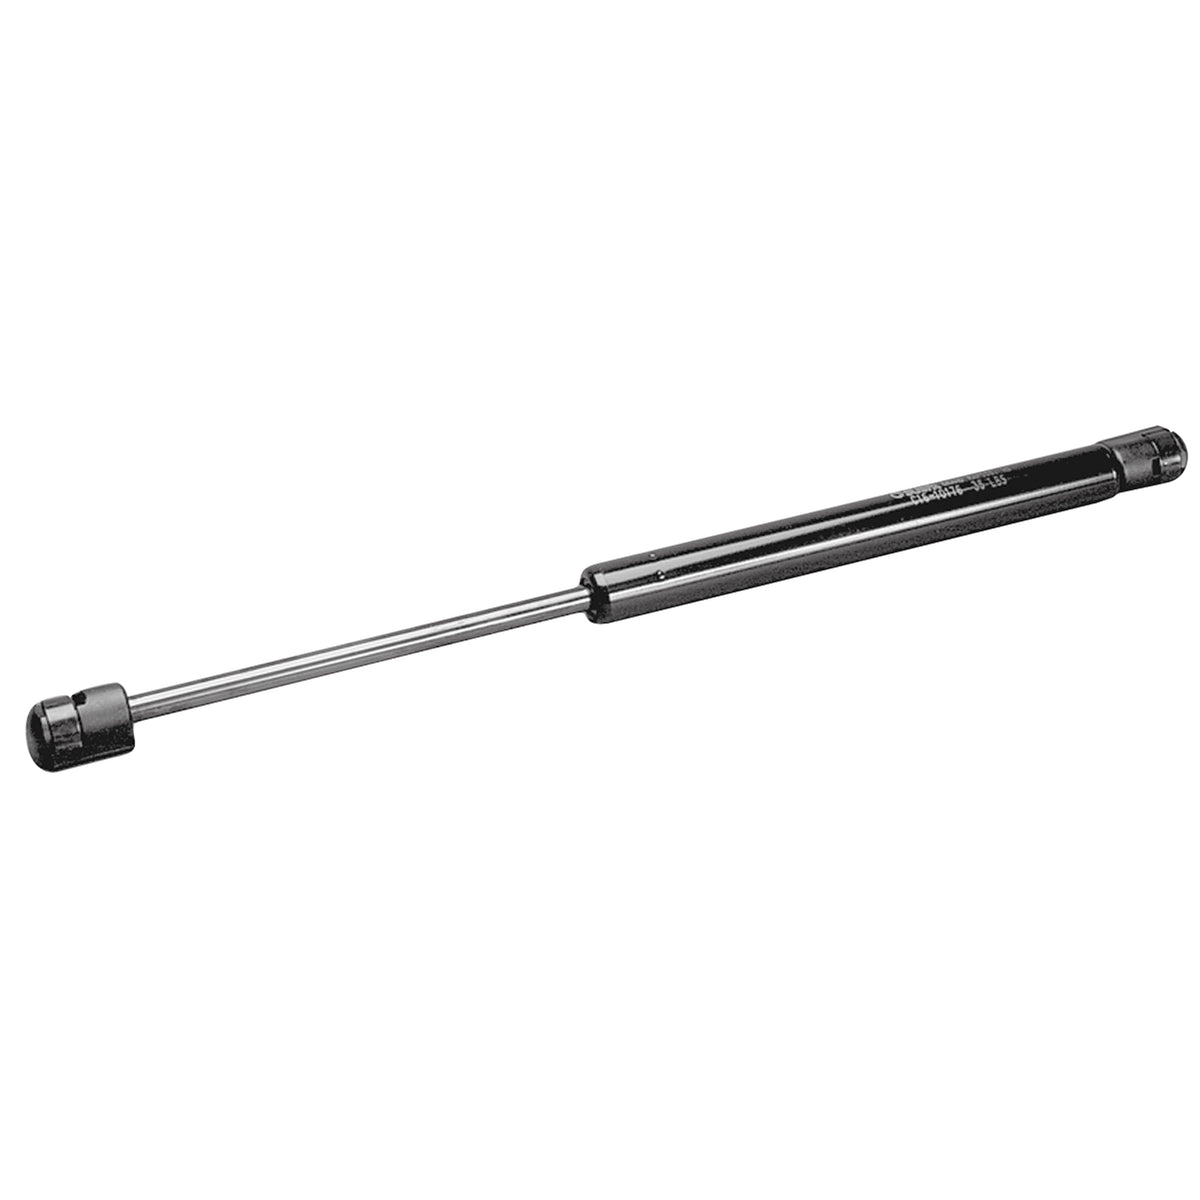 AP Products 010-072 Gas Prop - 13.98" Extended, 5.47" Stroke, 60 lbs.